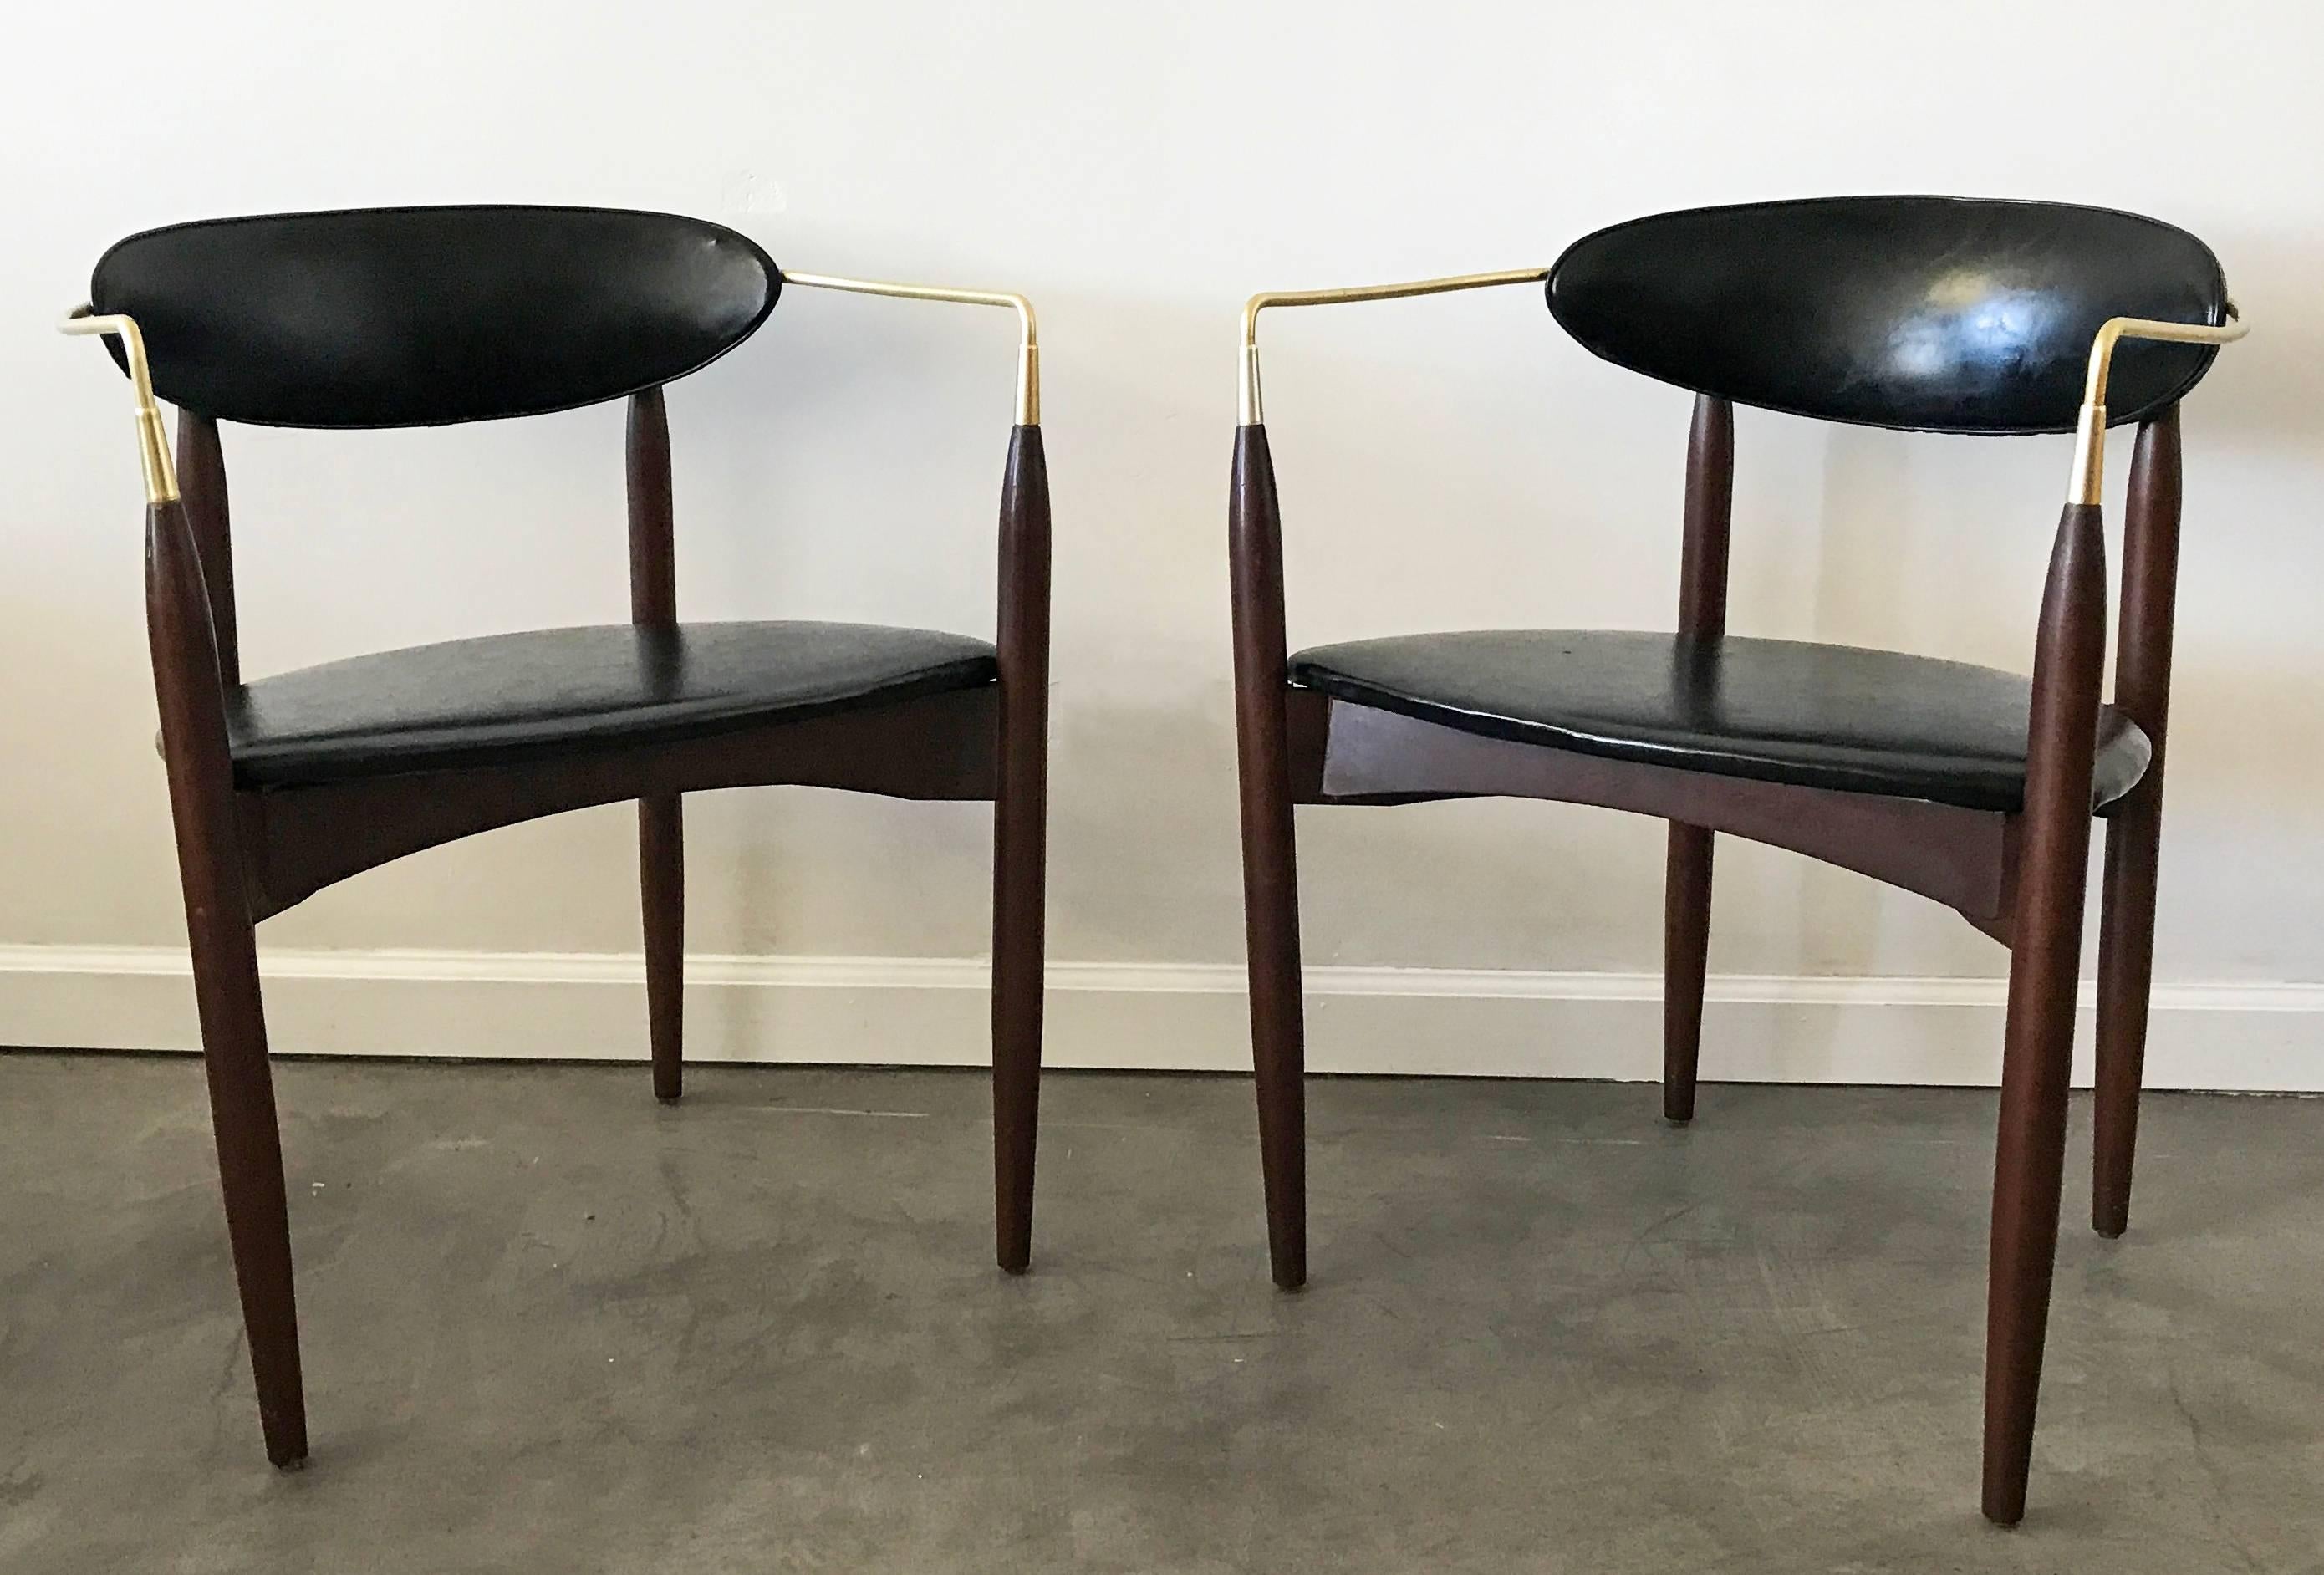 With clean lines and stunning design, these Dan Johnson Viscount chairs at a touch of Mid-Century Modern class and sophistication to every environment.